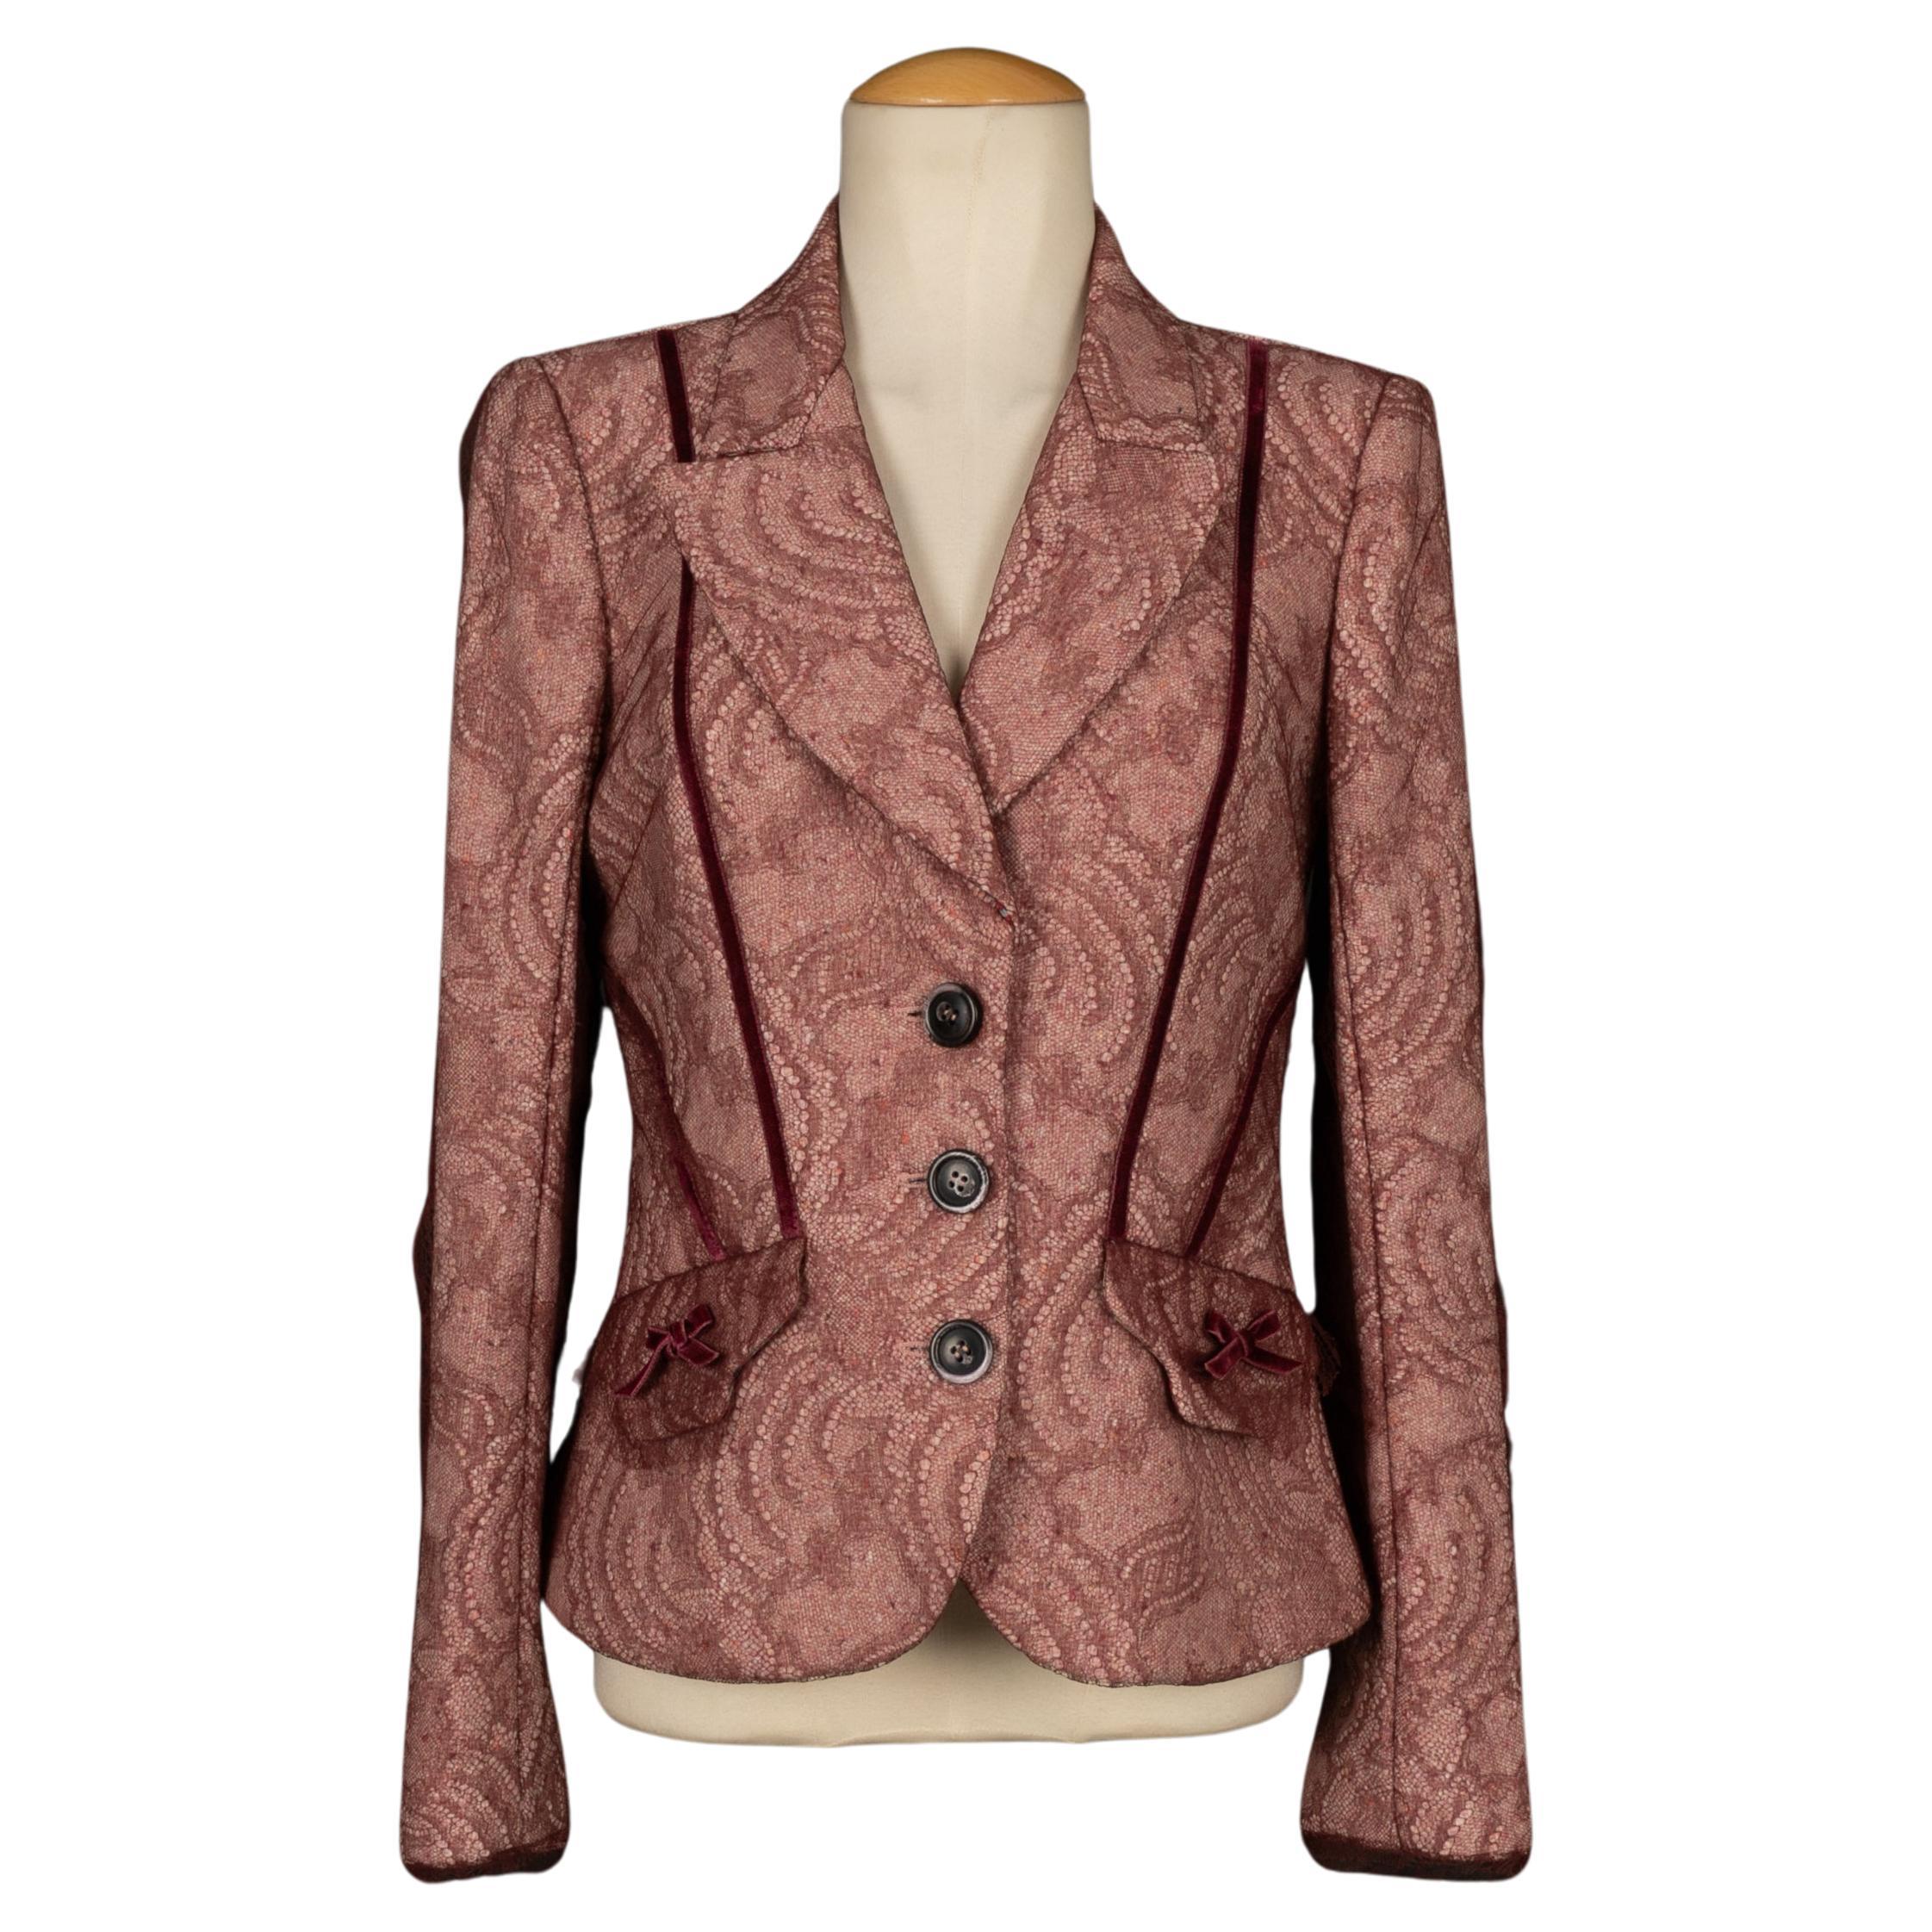 Christian Lacroix Lace Jacket in Pink Tones with Printed Cotton Lining, 2000s For Sale